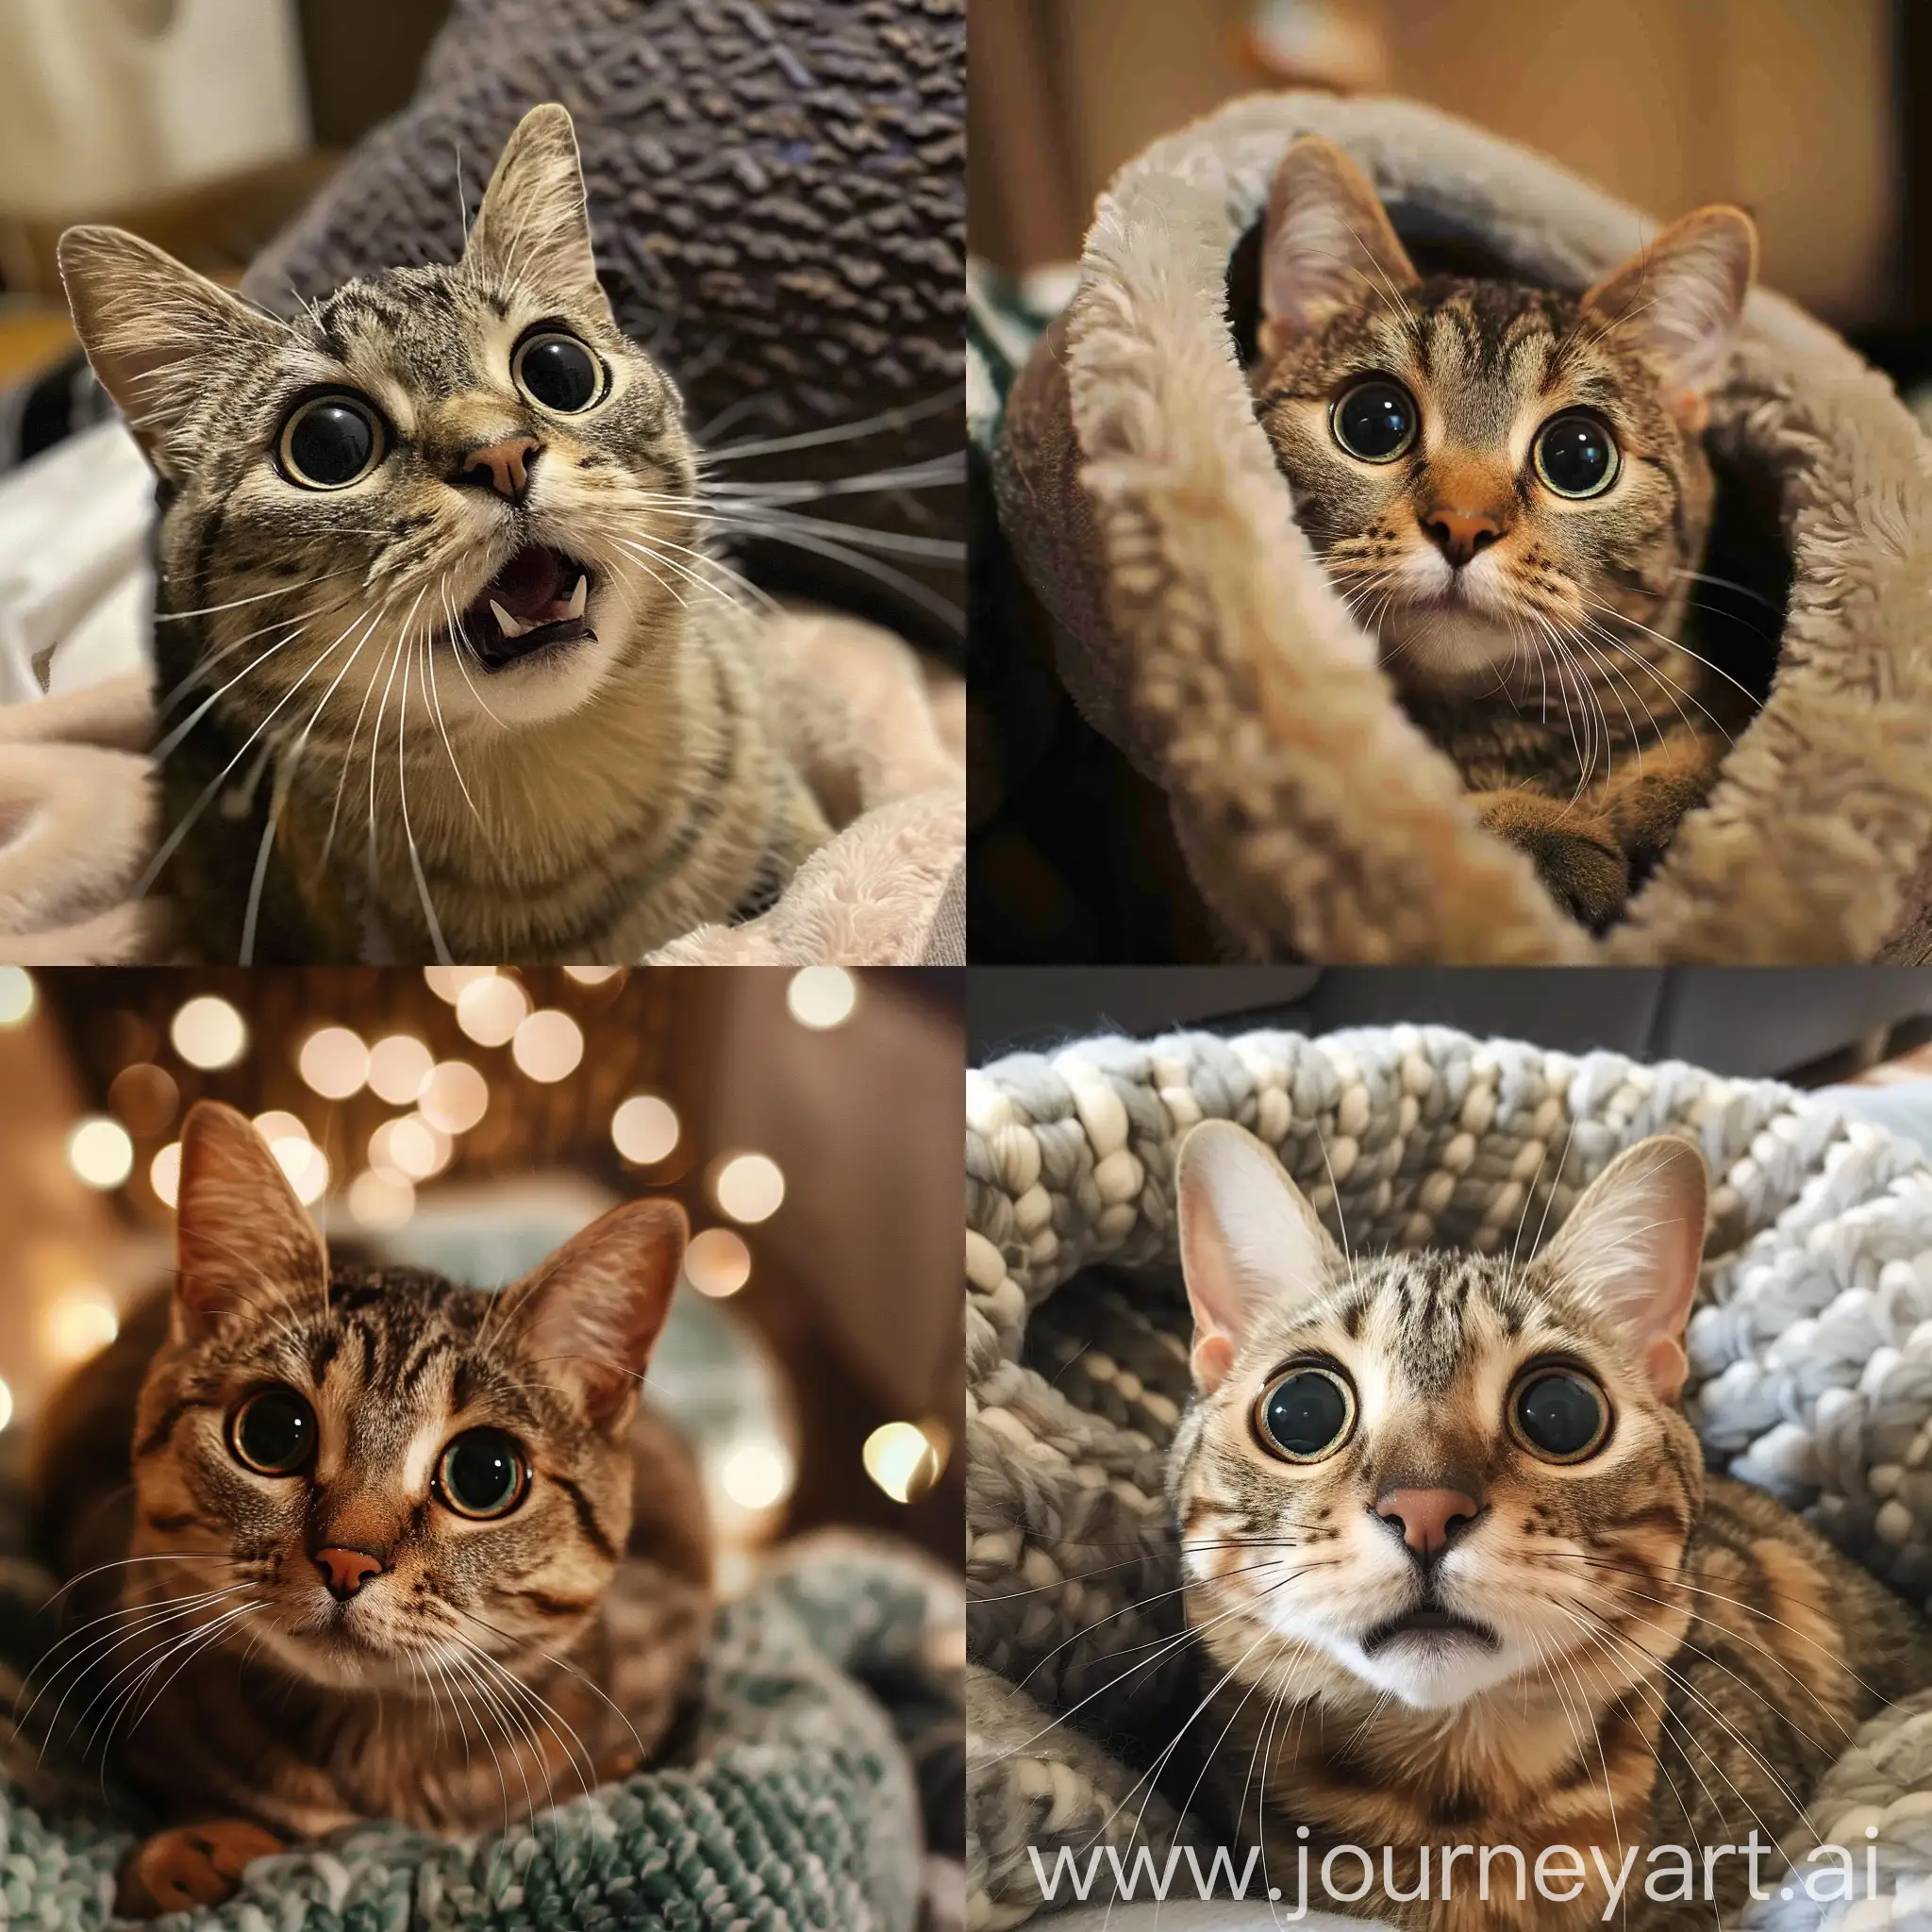 A cat with big eyes meowing in a cozy home